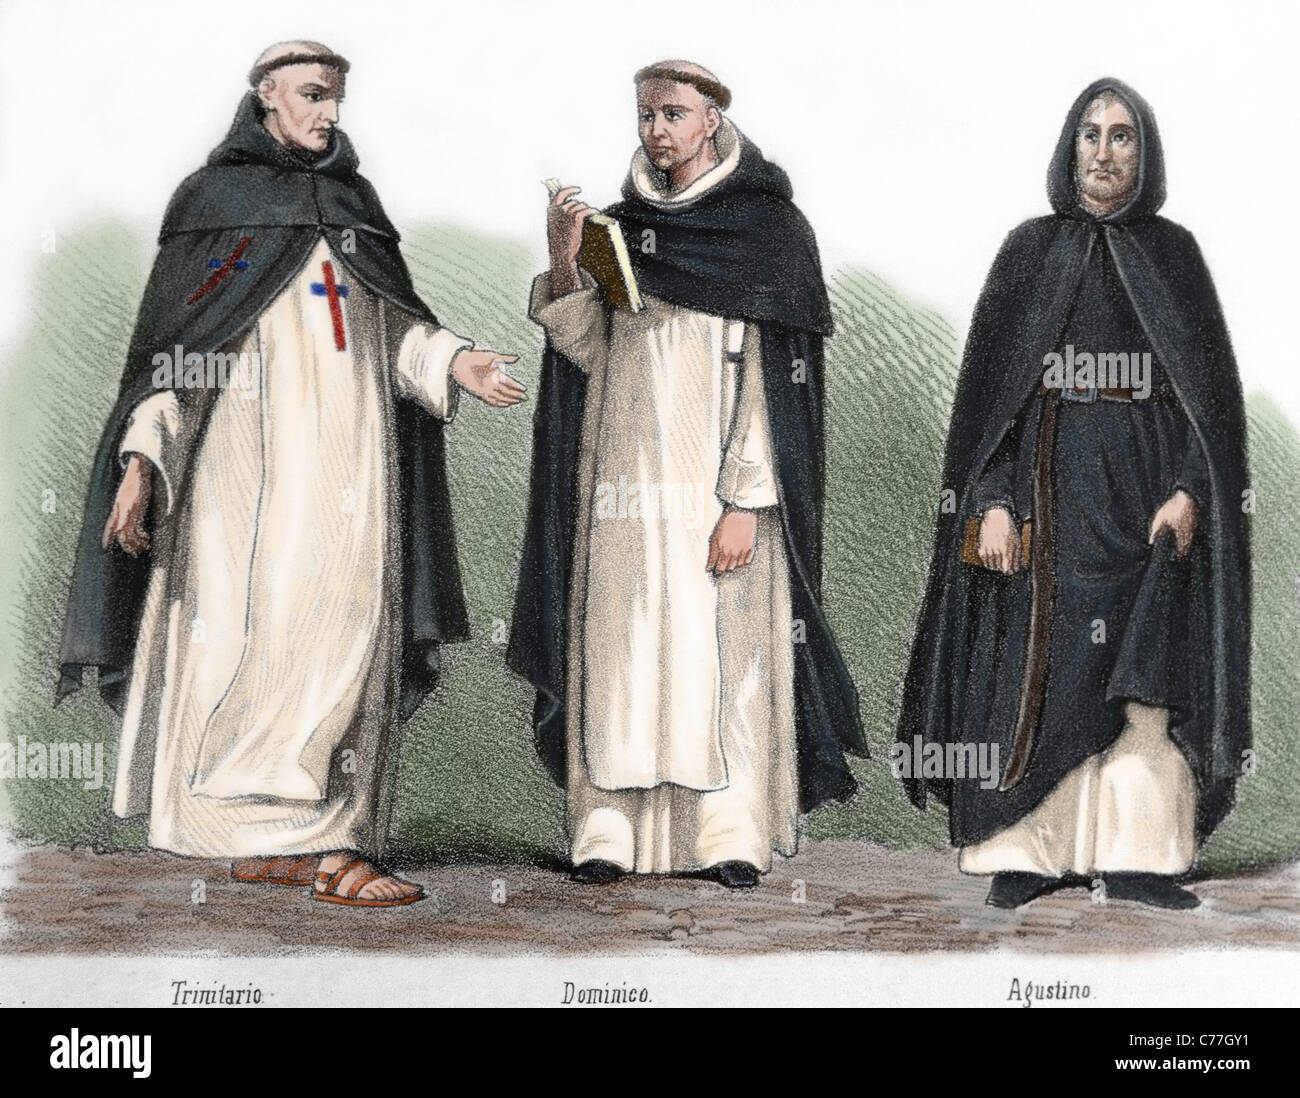 Mendicant orders in the Middle Ages. From left to right, Trinitarian friar, Dominican and Augustinian. Stock Photo